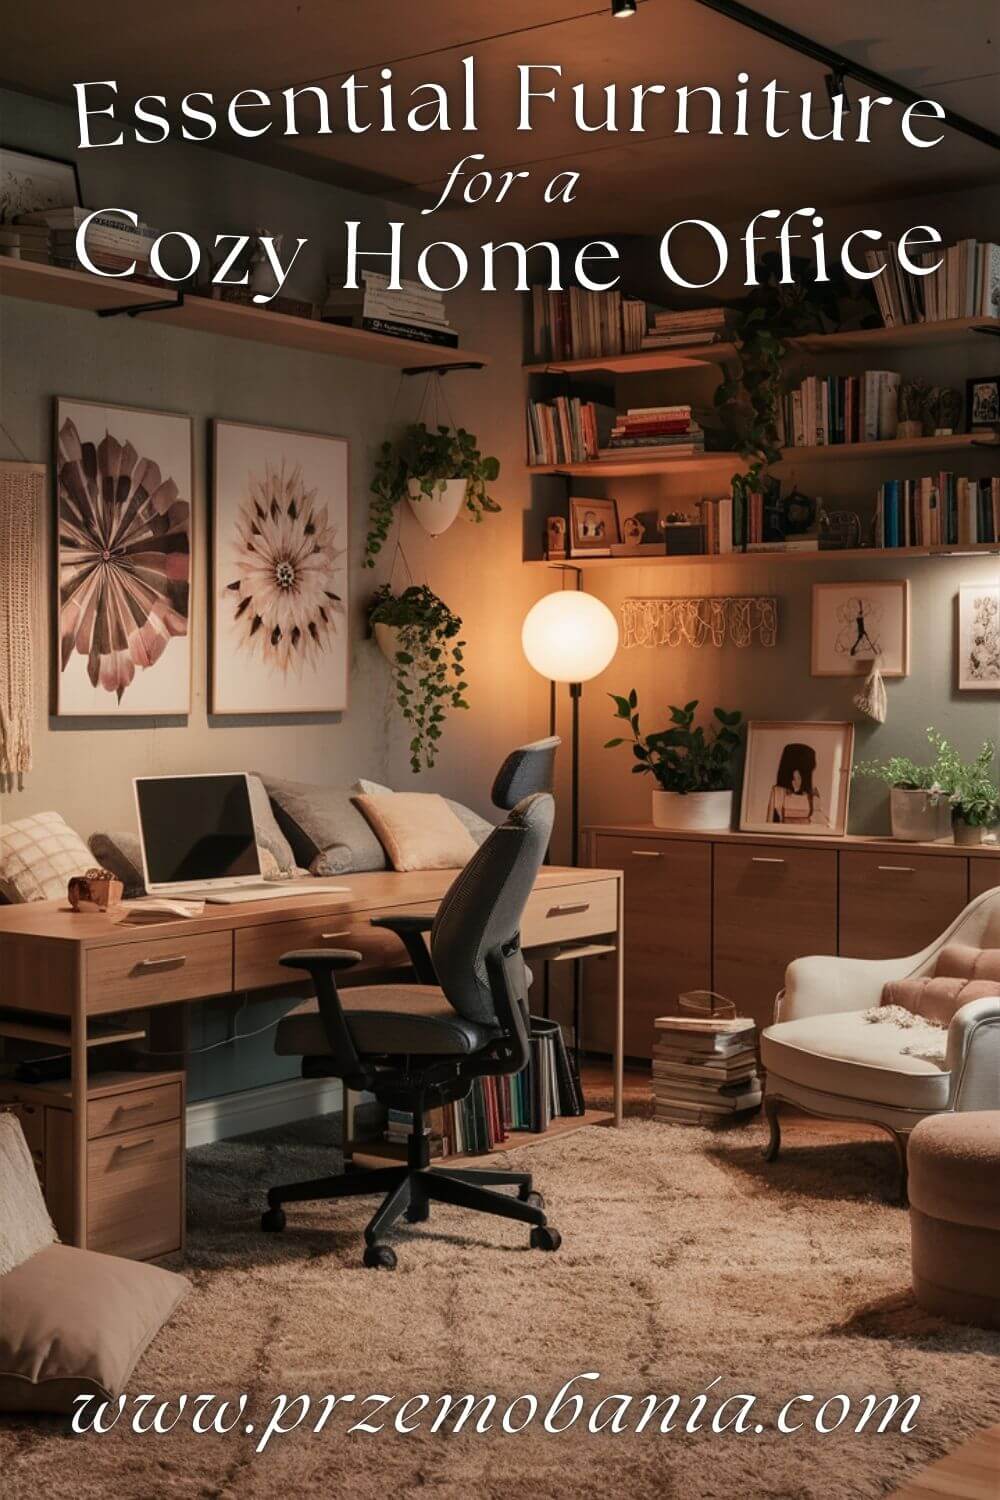 Essential Furniture for a Cozy Home Office 1